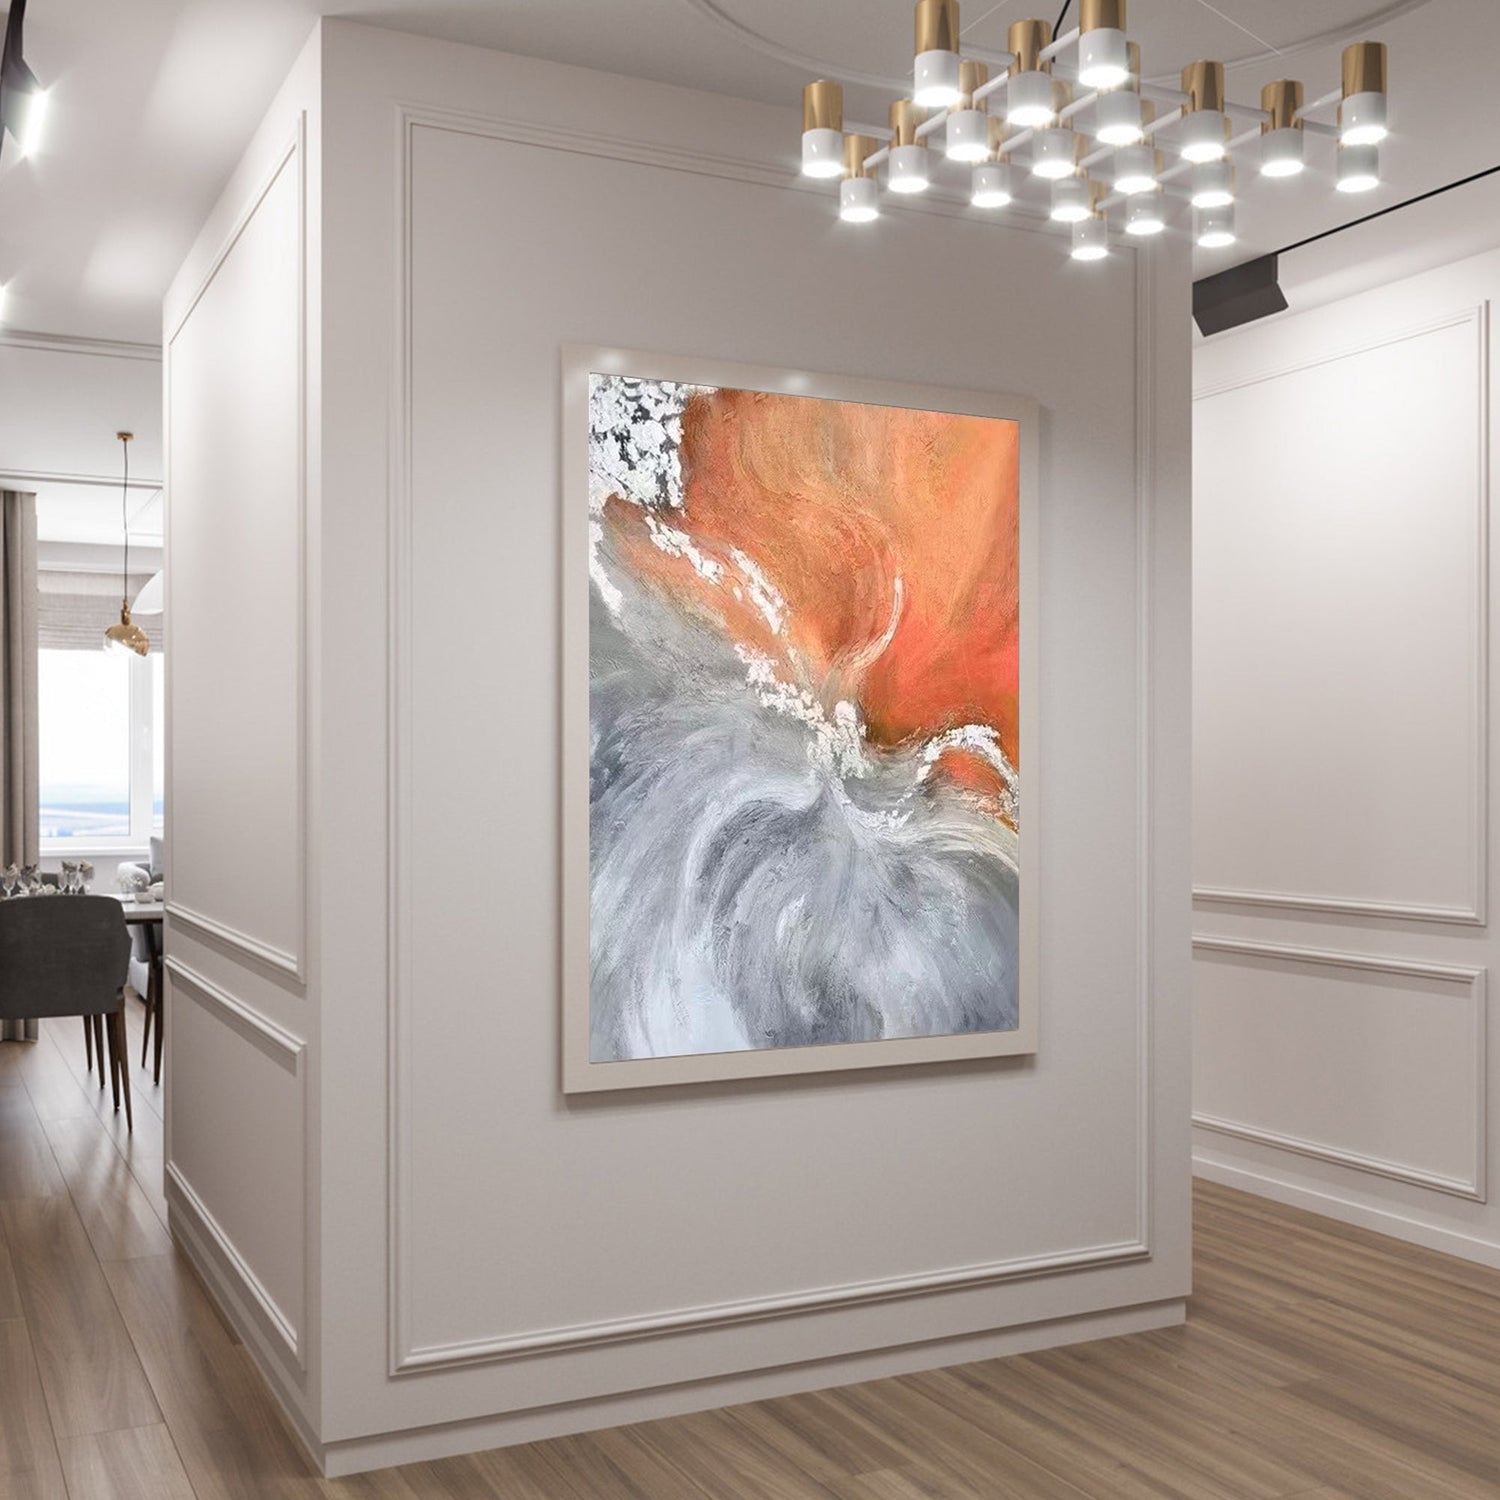 Orange and Grey Abstract Painting Australia, Fusion, Hand-painted Canvas,artists that use watercolour,artists that work with clay,artists that work with metal,artists to invest in 2020,,artling singapore